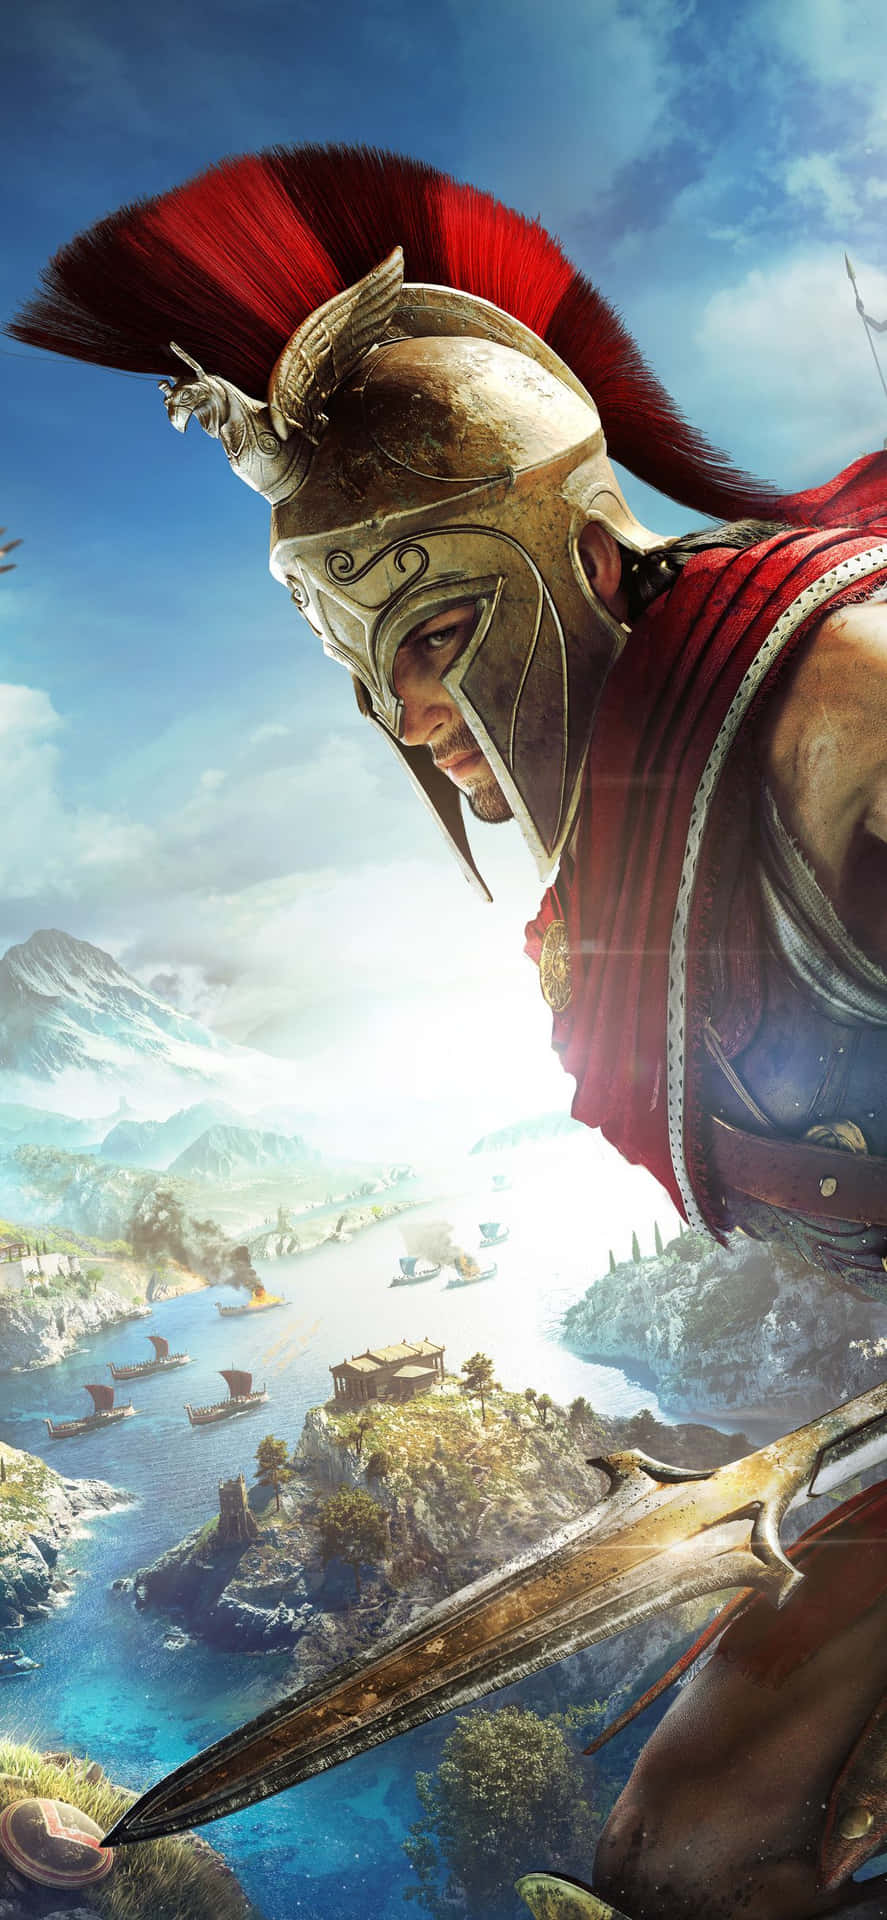 Salpaonline Con Assassin's Creed Odyssey Su Android